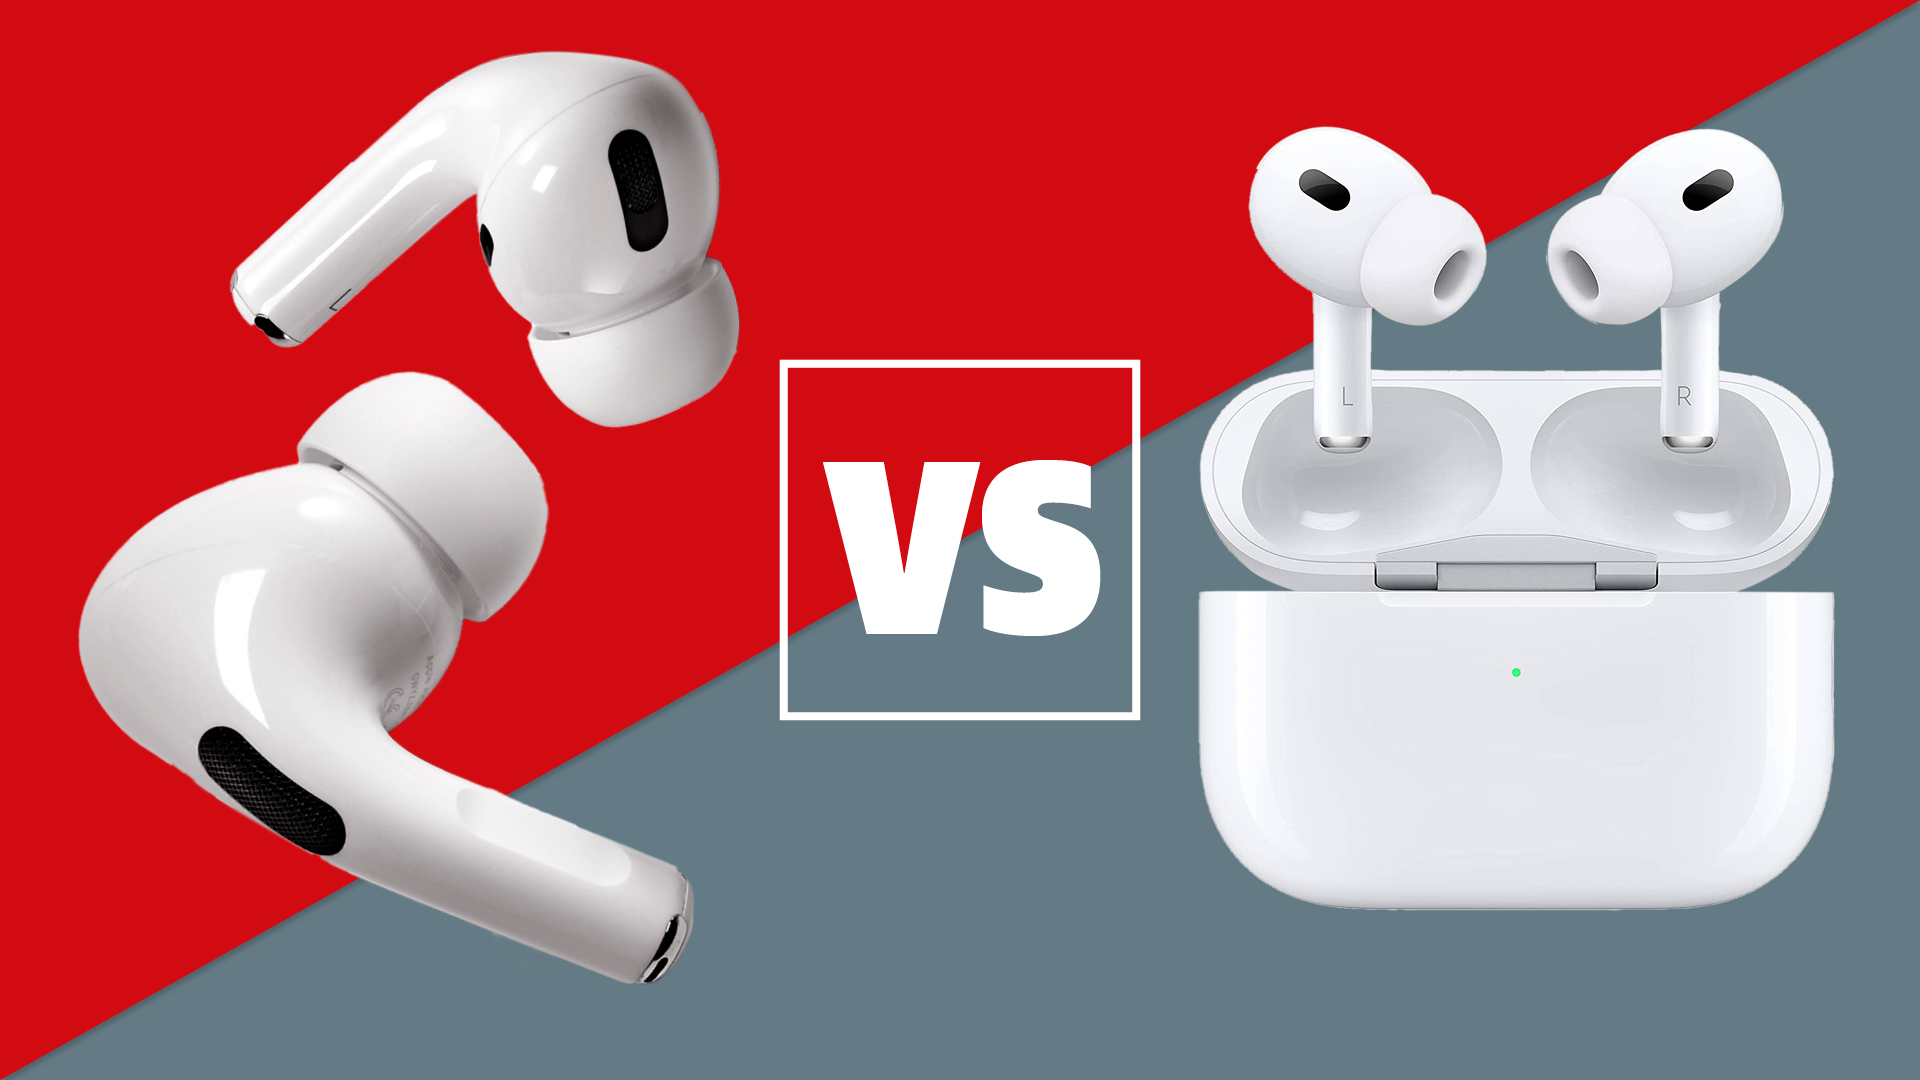 Apple AirPods Pro (2nd generation) Truly Wireless Review 